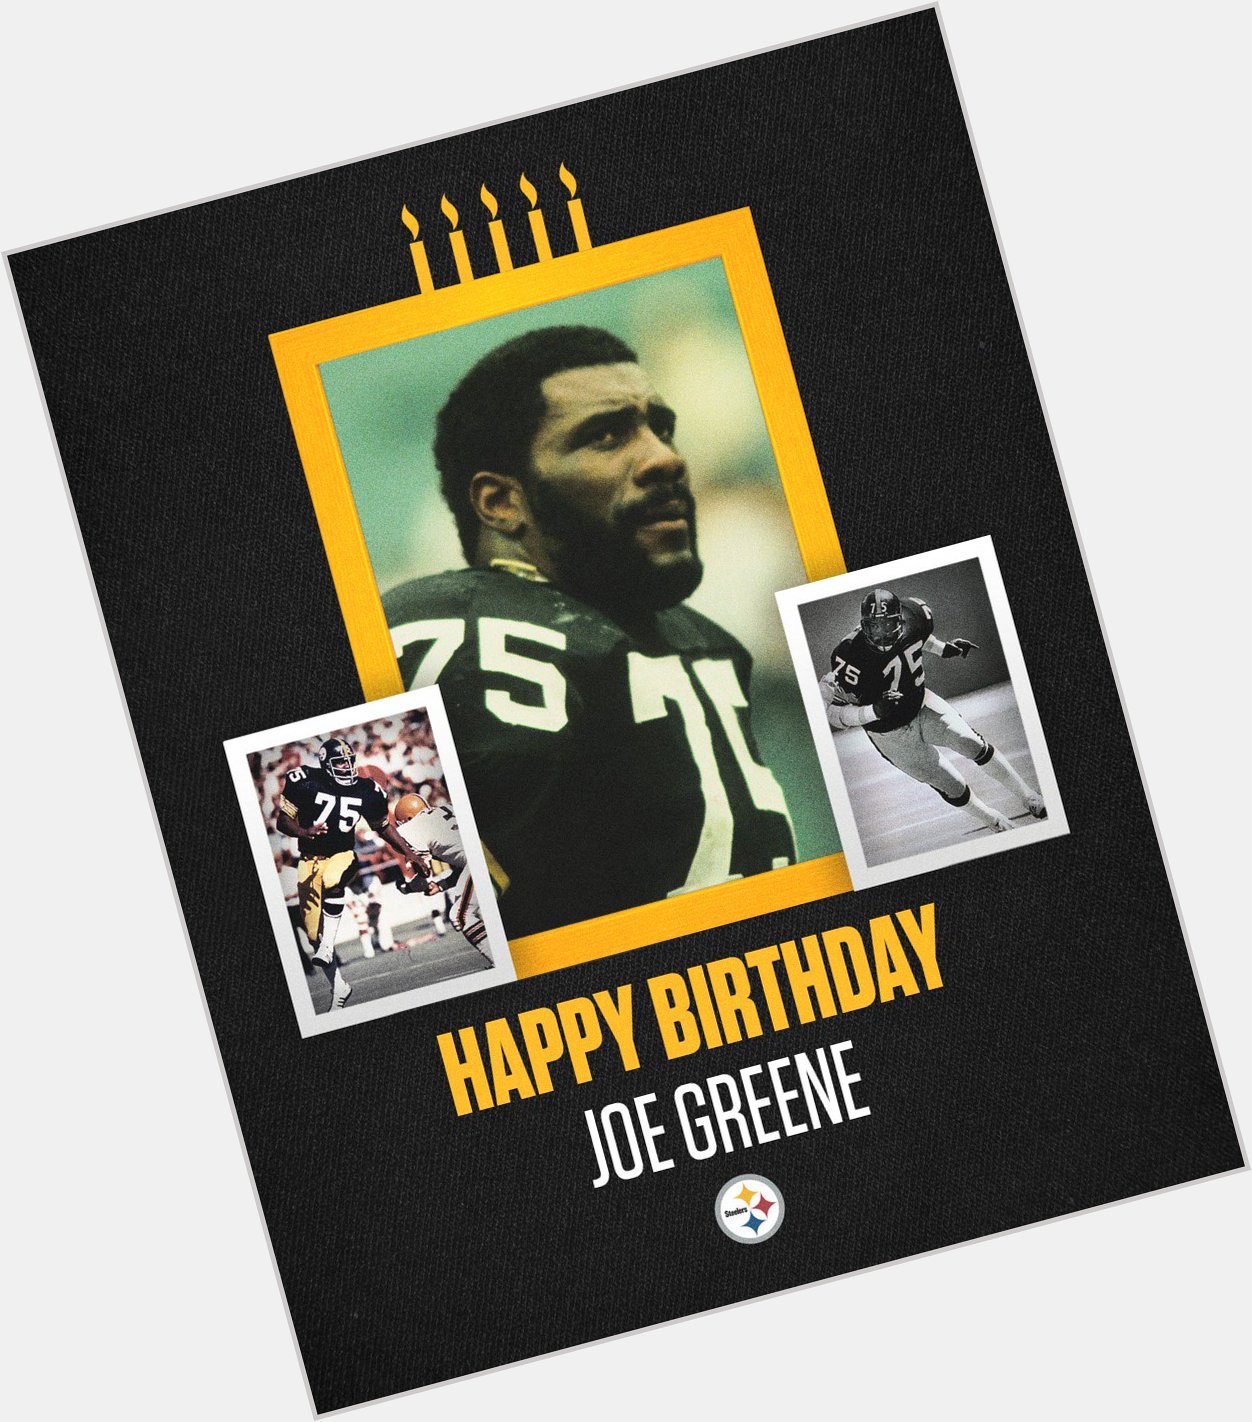 The himself, still going strong after all these years. Happy Birthday Joe Greene 